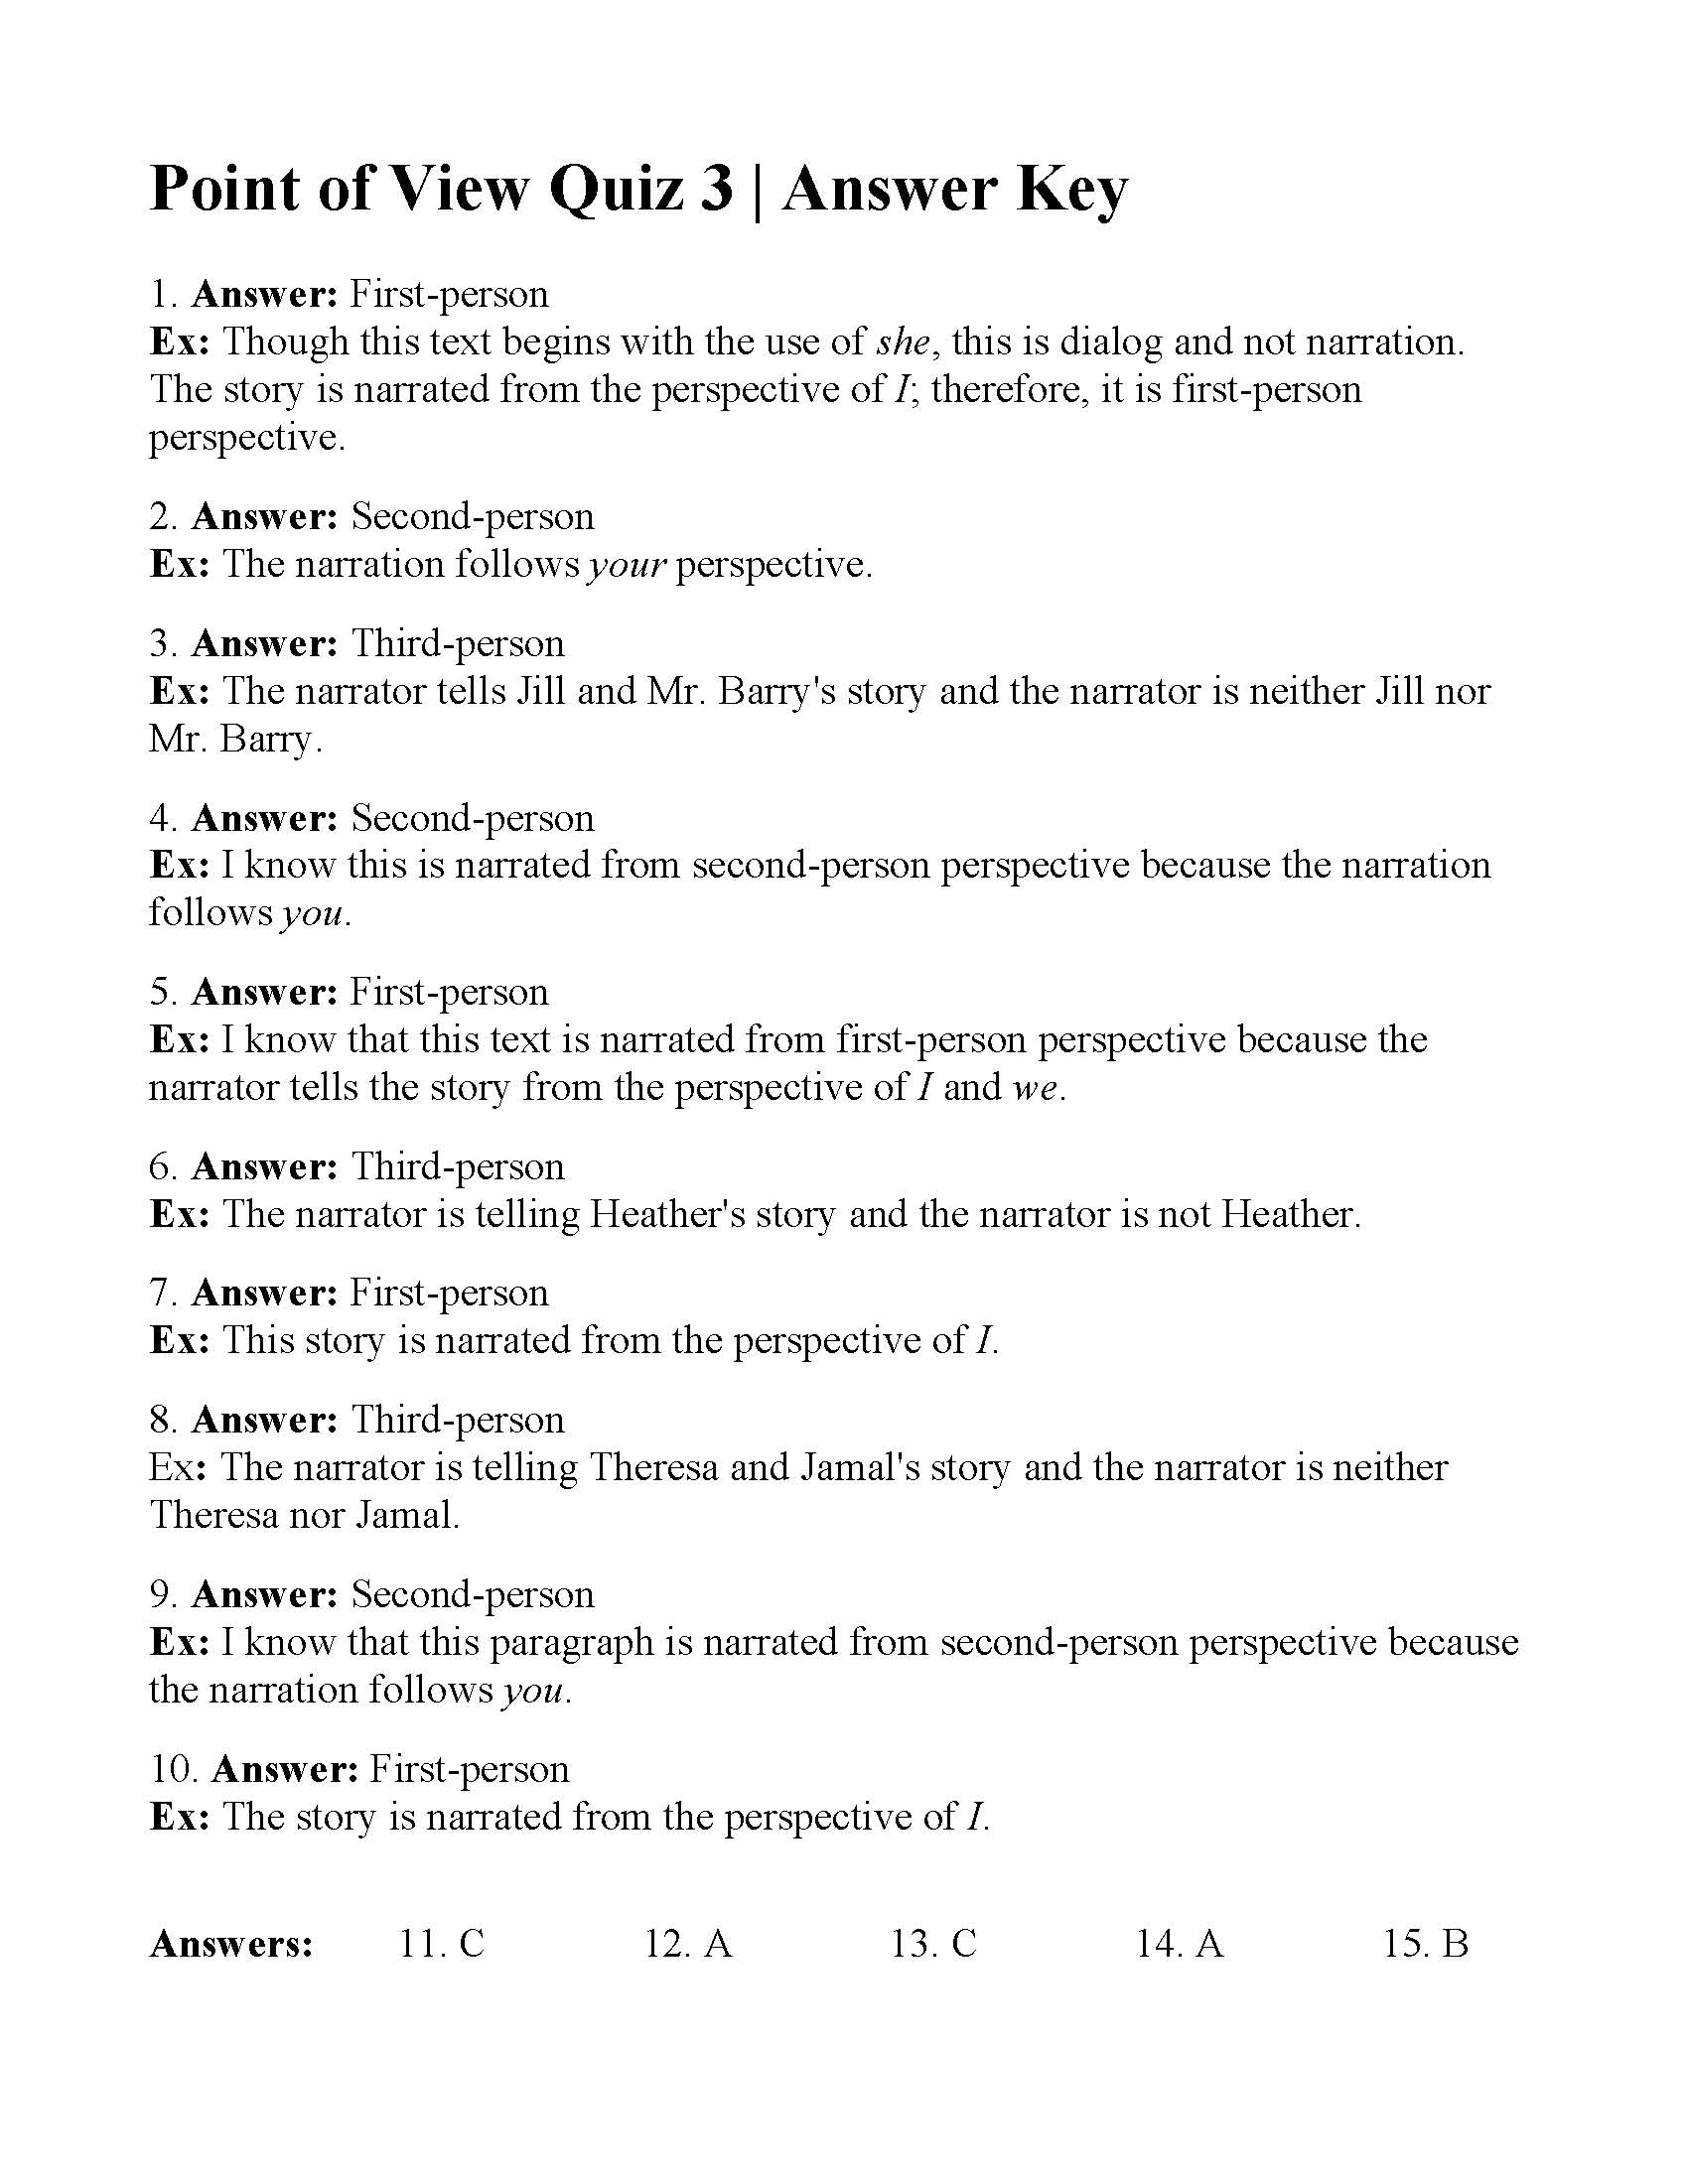 This is a preview image of Point of View Quiz 3. Click on it to enlarge it or view the source file.